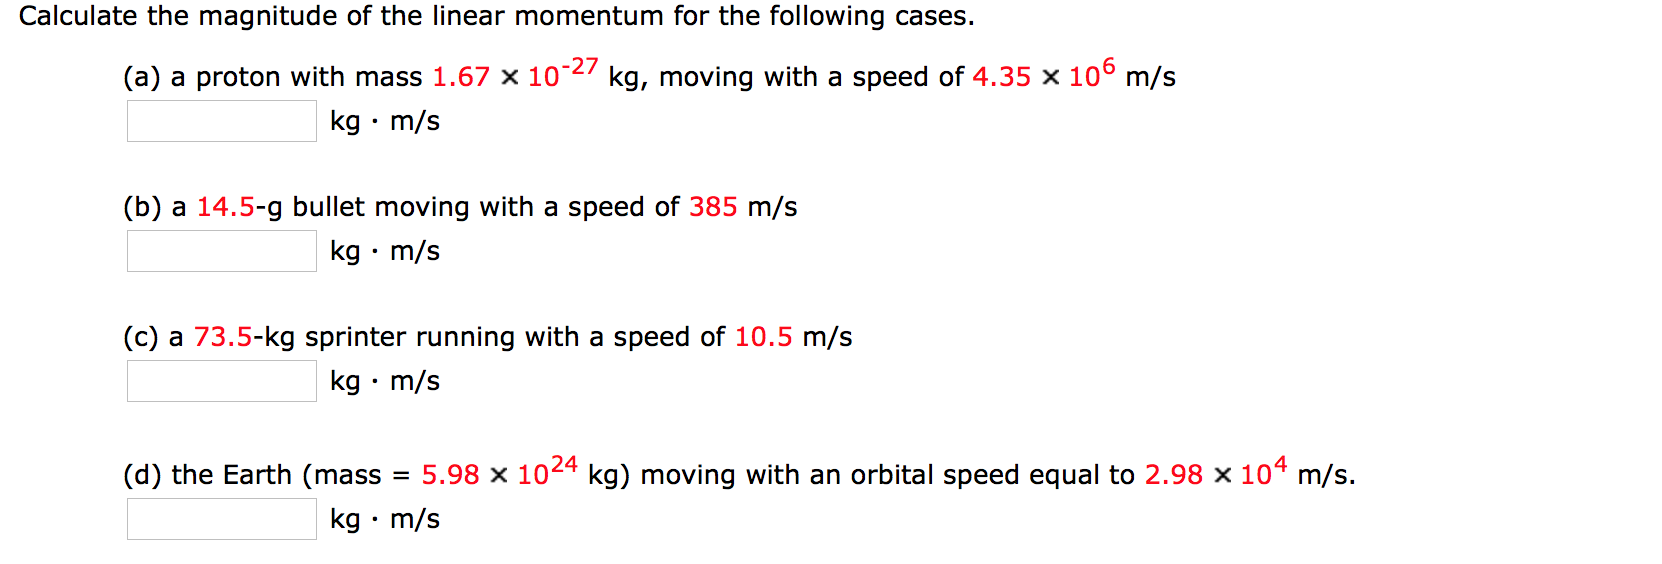 Calculate the magnitude of the linear momentum for the following cases.
(a) a proton with mass 1.67 x 102 kg, moving with a speed of 4.35 x 100 m/s
kg m/s
(b) a 14.5-g bullet moving with a speed of 385 m/s
kg m/s
.
(c) a 73.5-kg sprinter running with a speed of 10.5 m/s
kg m/s
5.98 x 1024 kg) moving with an orbital speed equal to 2.98 x 104 m/s
(d) the Earth (mass
kg m/s
.
